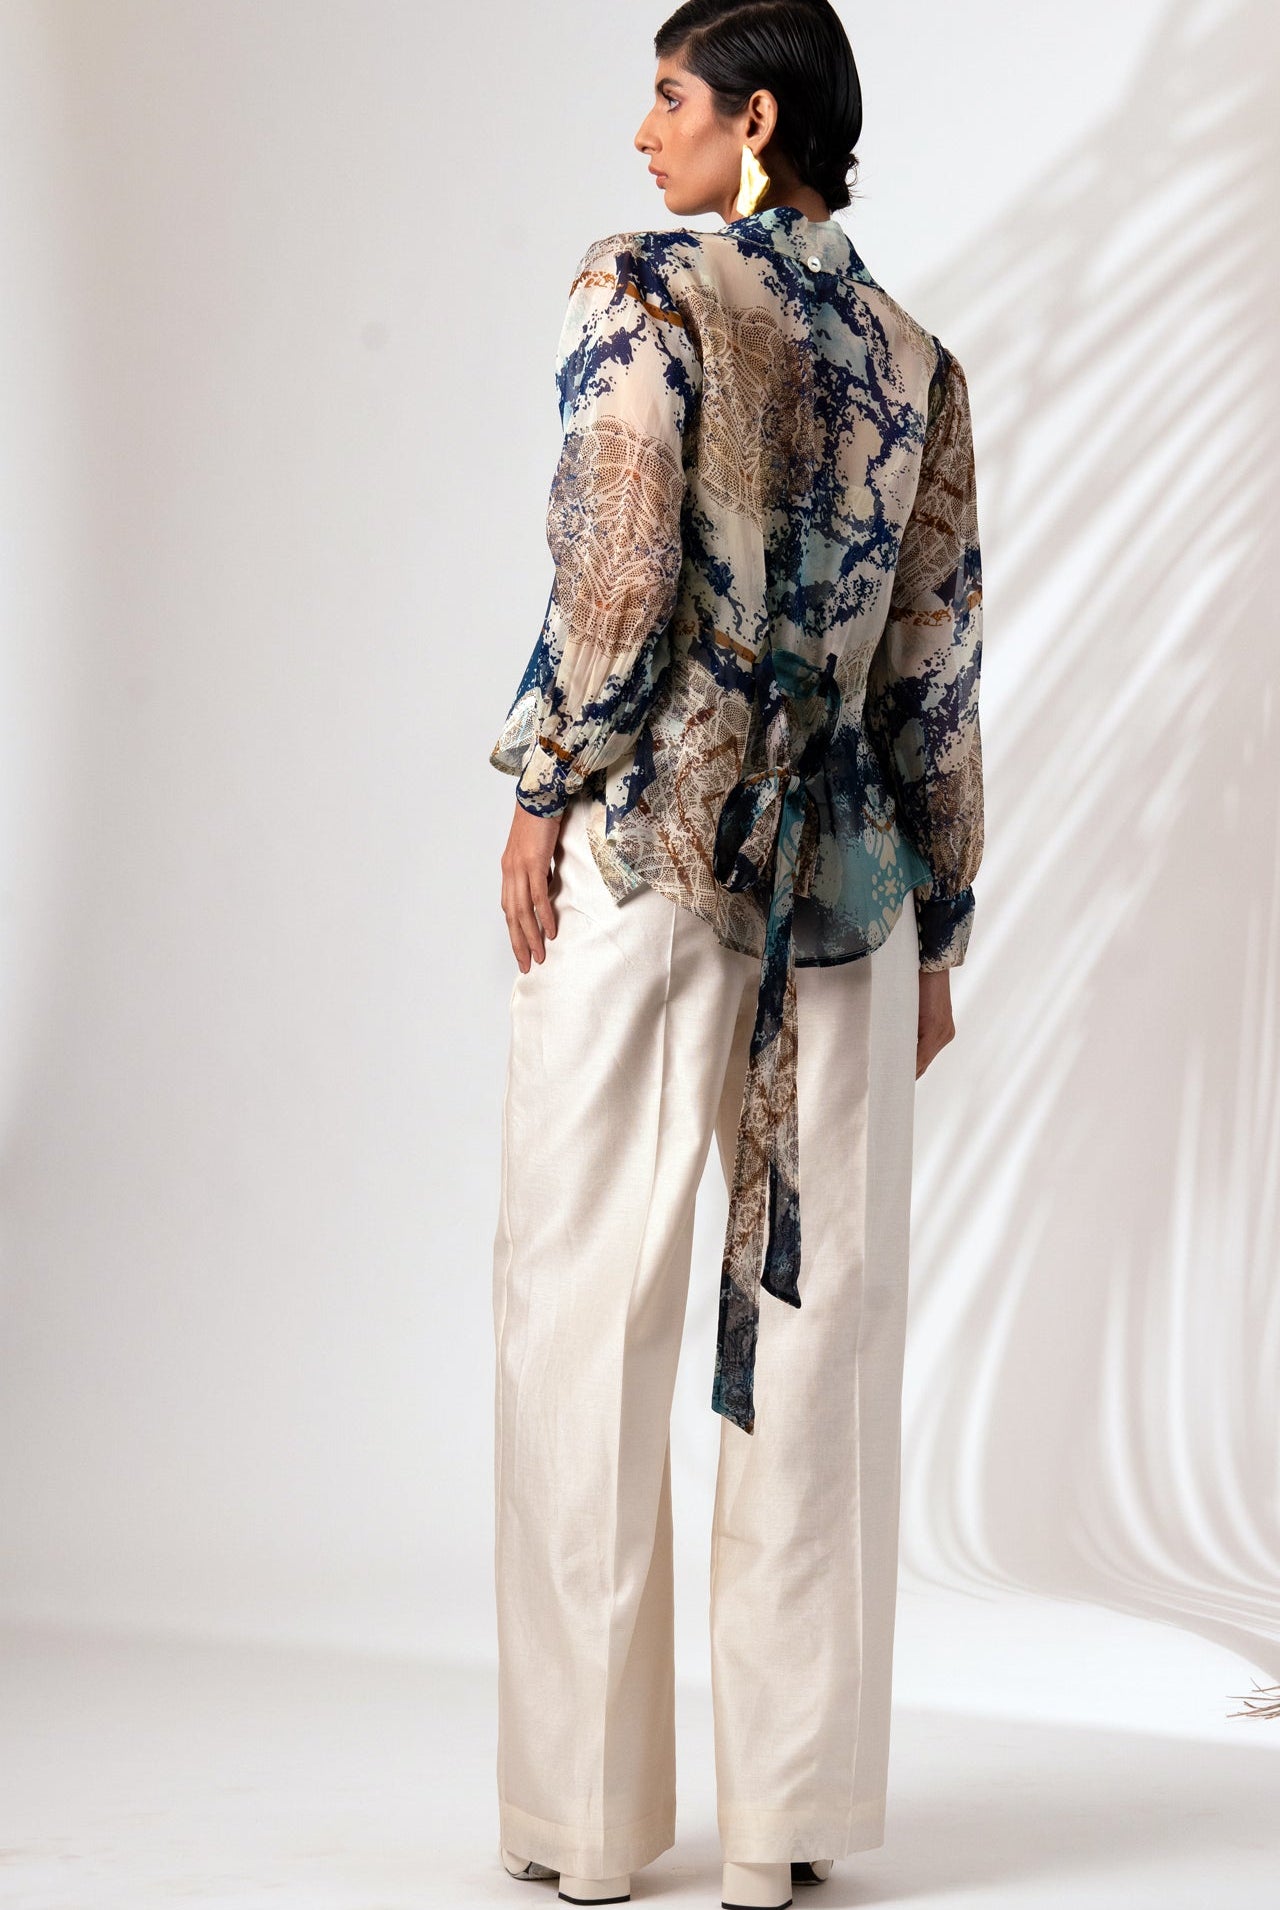 Crystal - Trench Top + Trousers - CiceroniCo-ord SetMadder Much